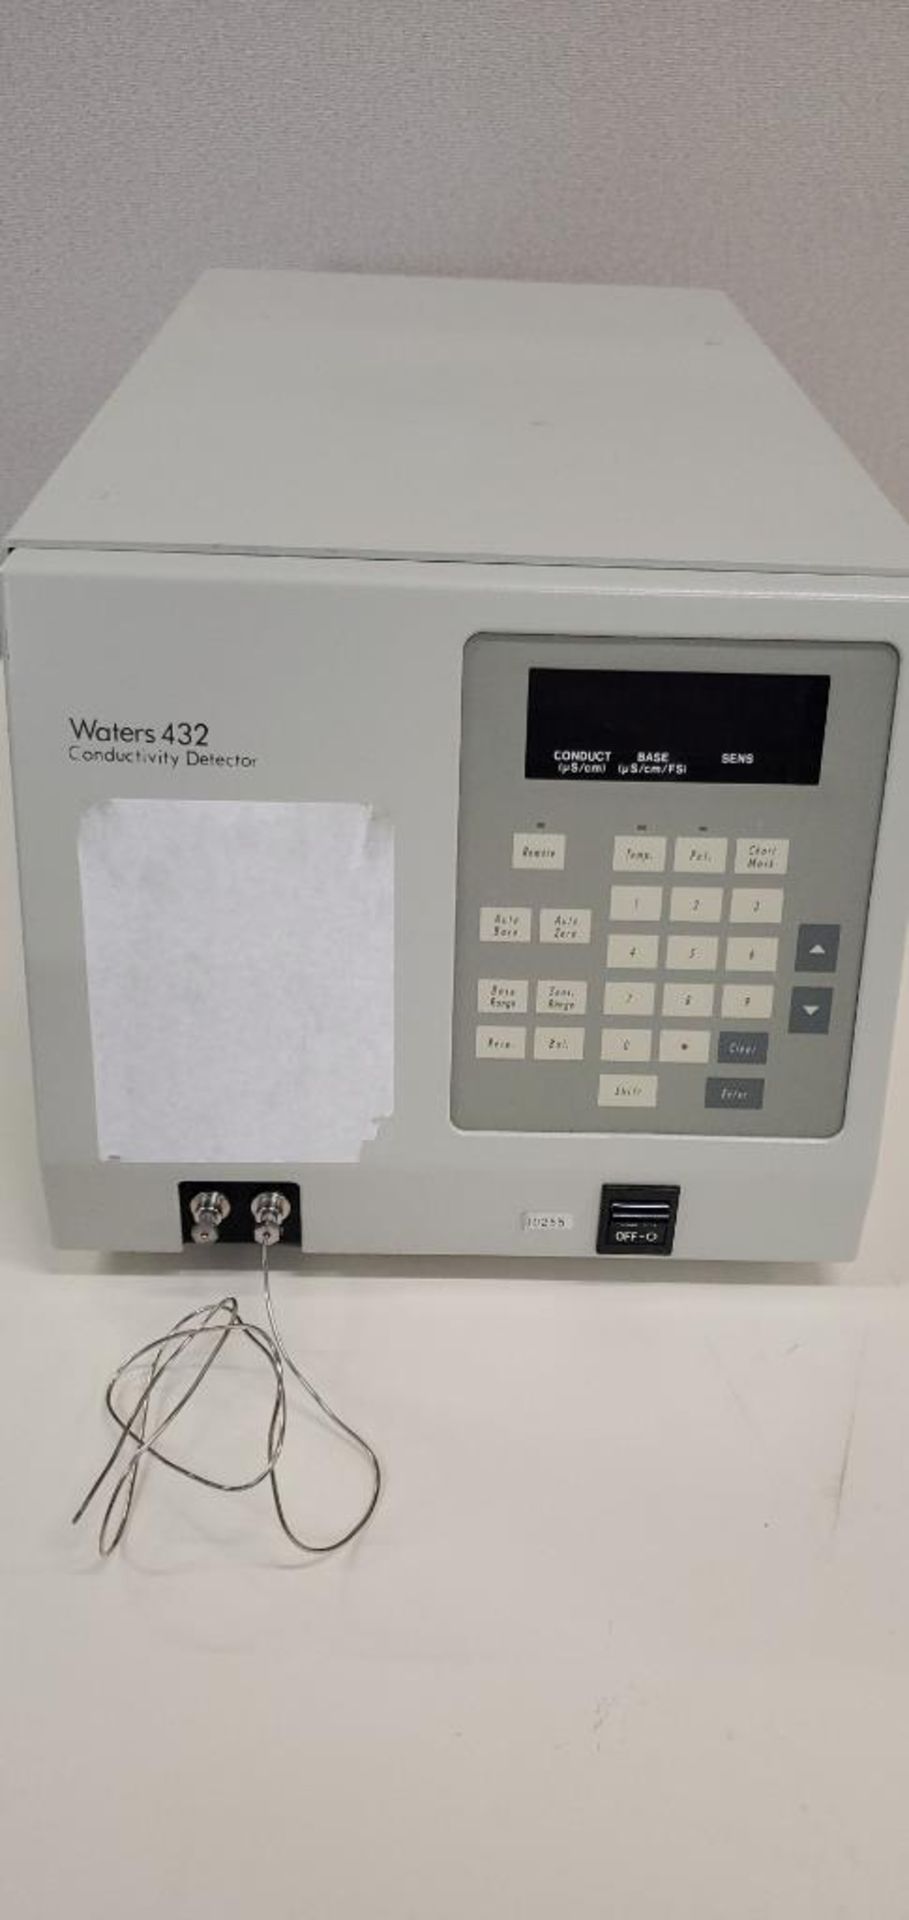 Waters 432 Conductivity Detector - Image 2 of 3